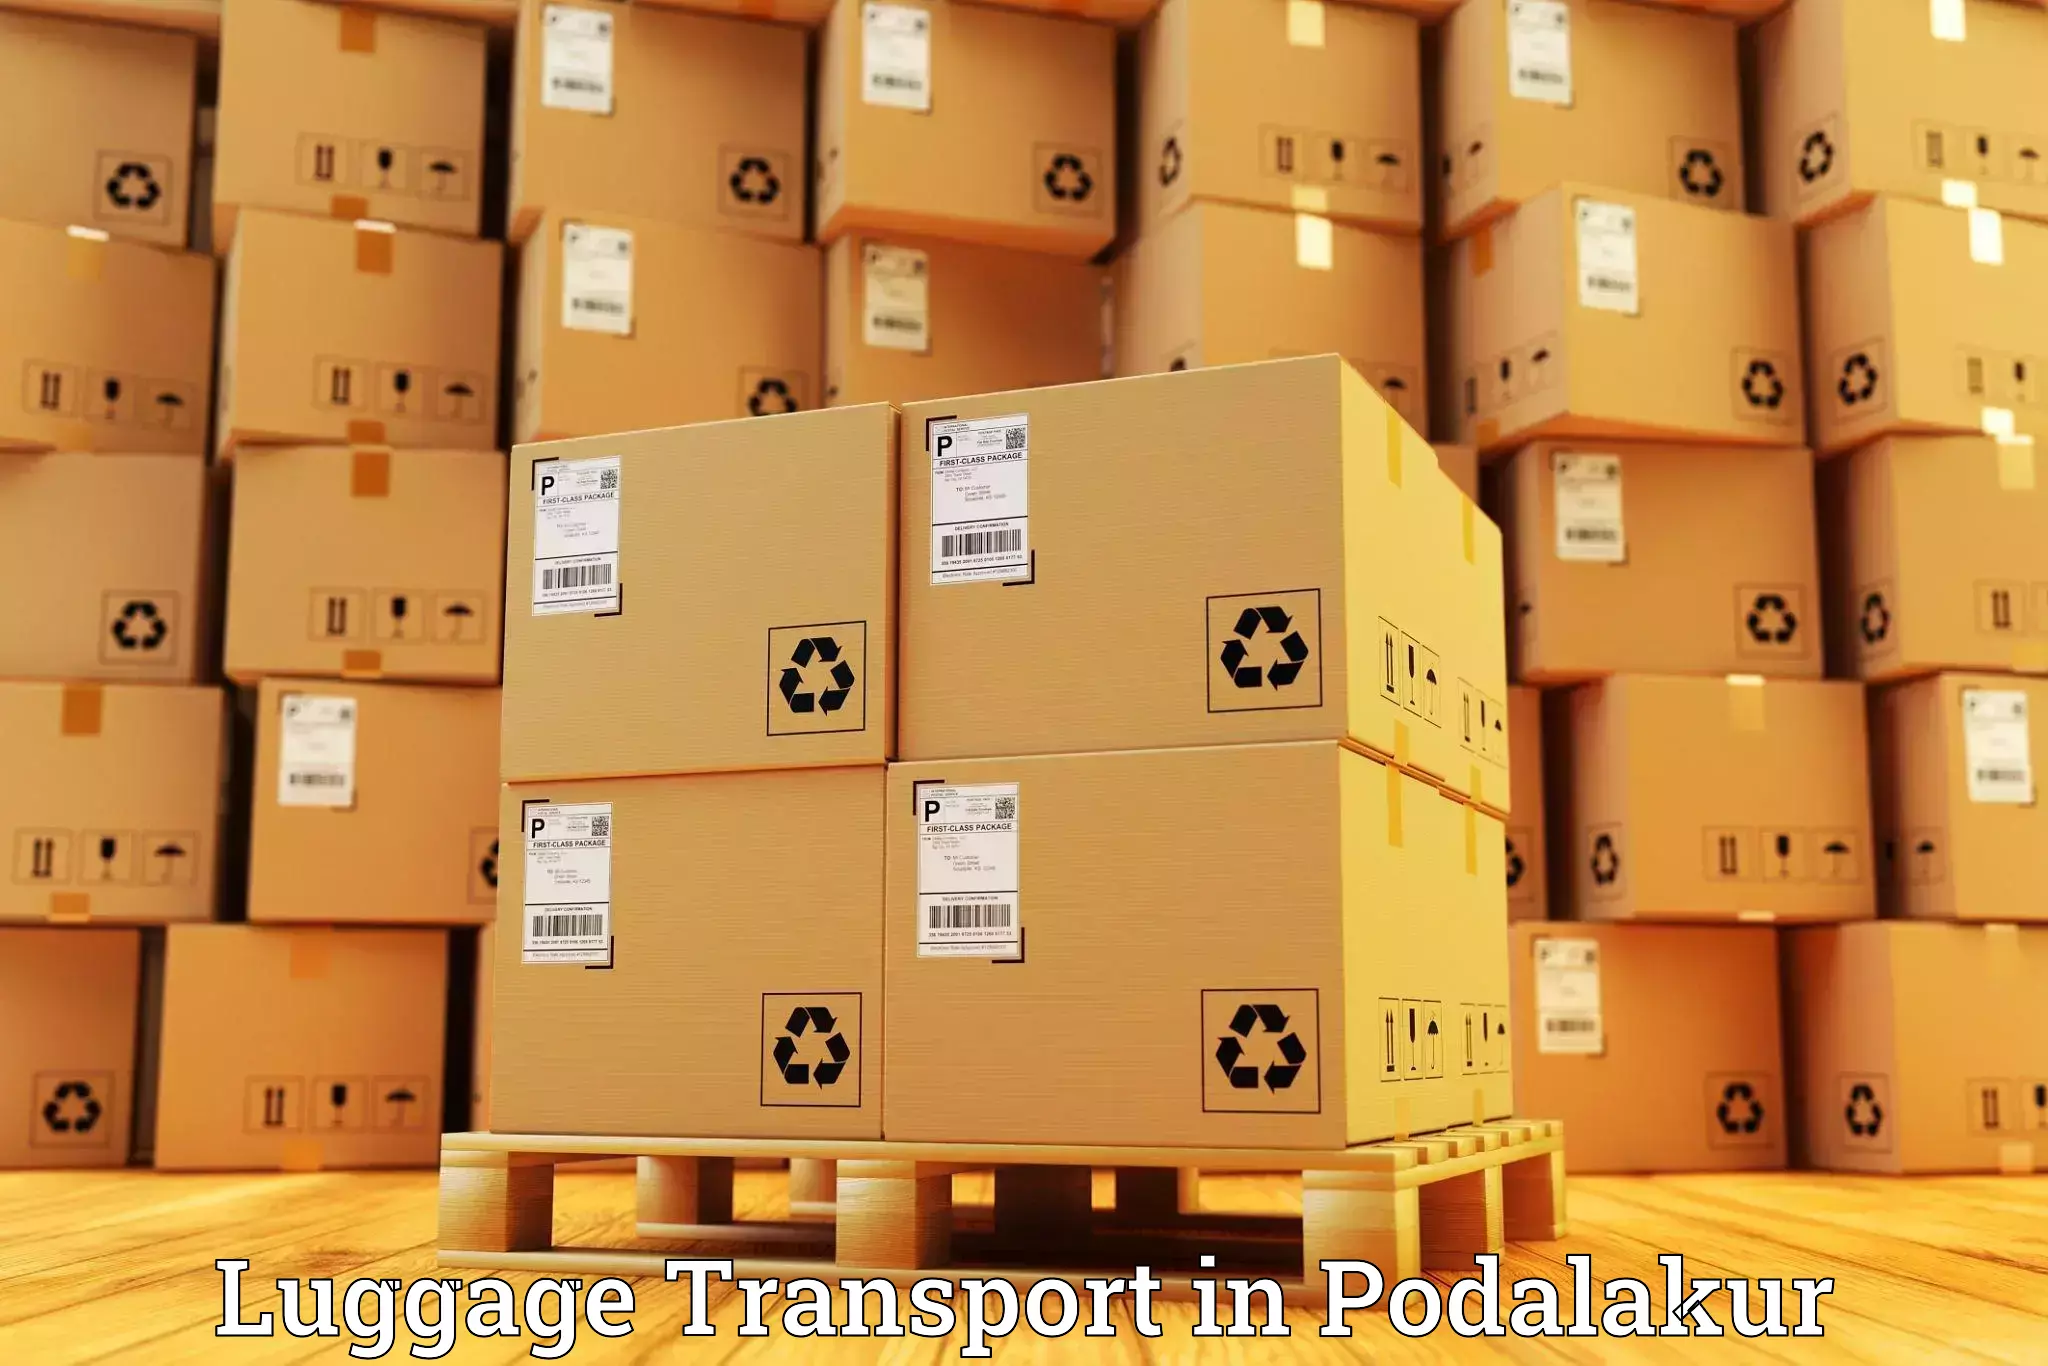 Discounted baggage transport in Podalakur